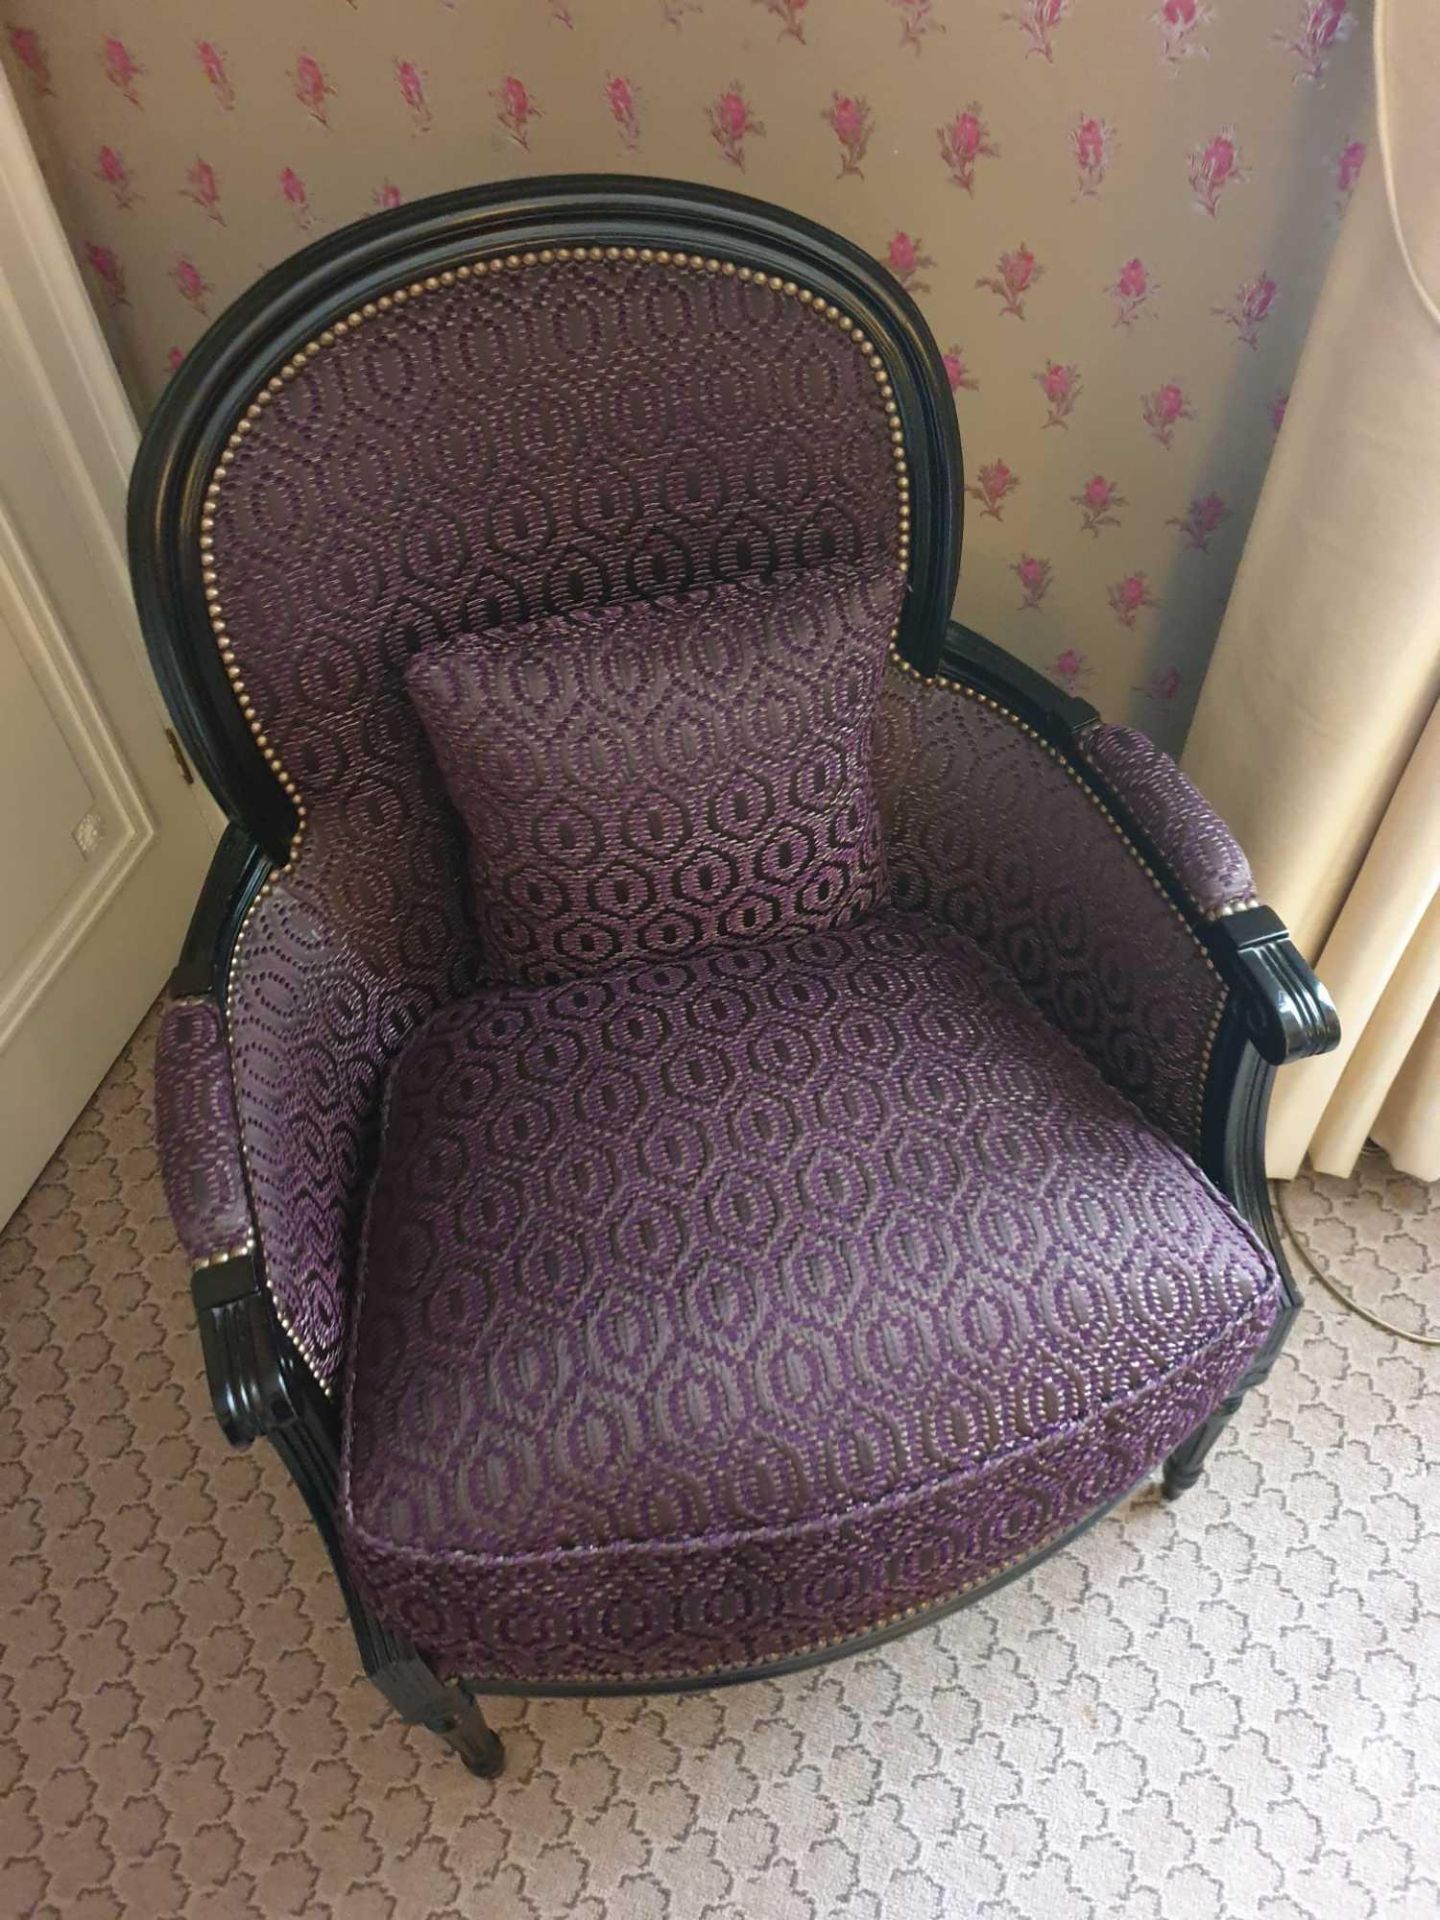 Bergere Chair Black Wood Frame Upholstered In A Dark Mauve Pattern With Stud Pin Detail